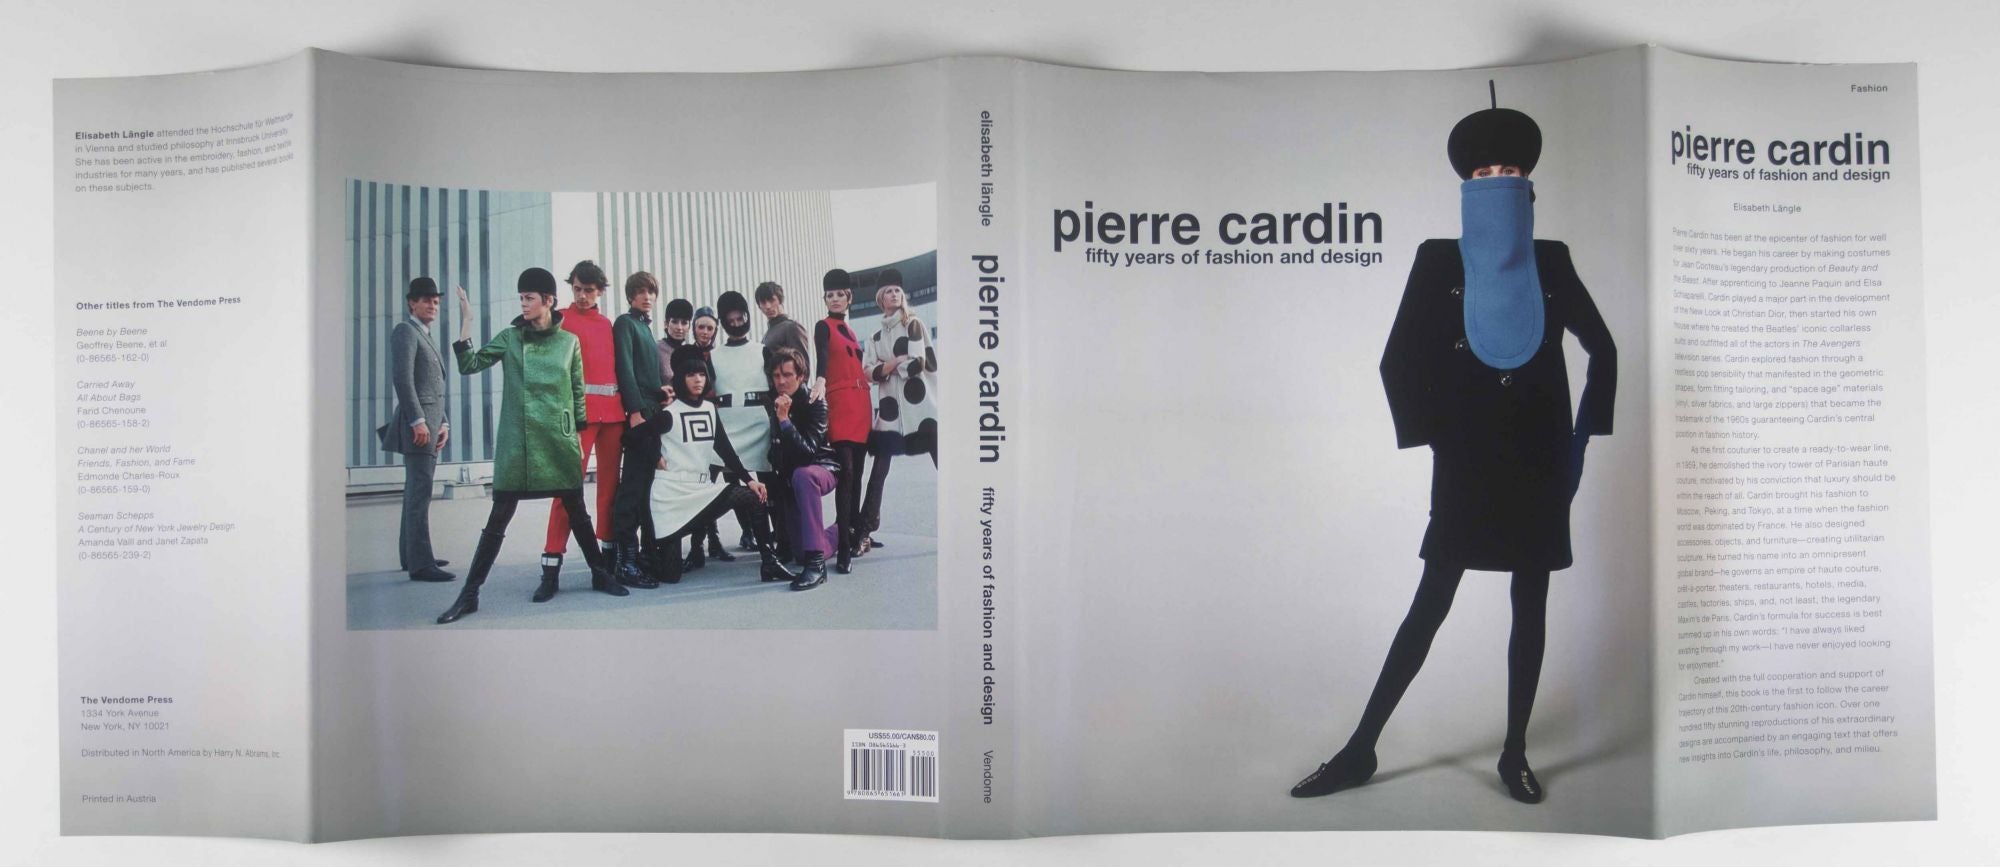 Pierre Cardin. Fifty Years of Fashion and Design by Elisabeth Längle on  Eric Chaim Kline, Bookseller